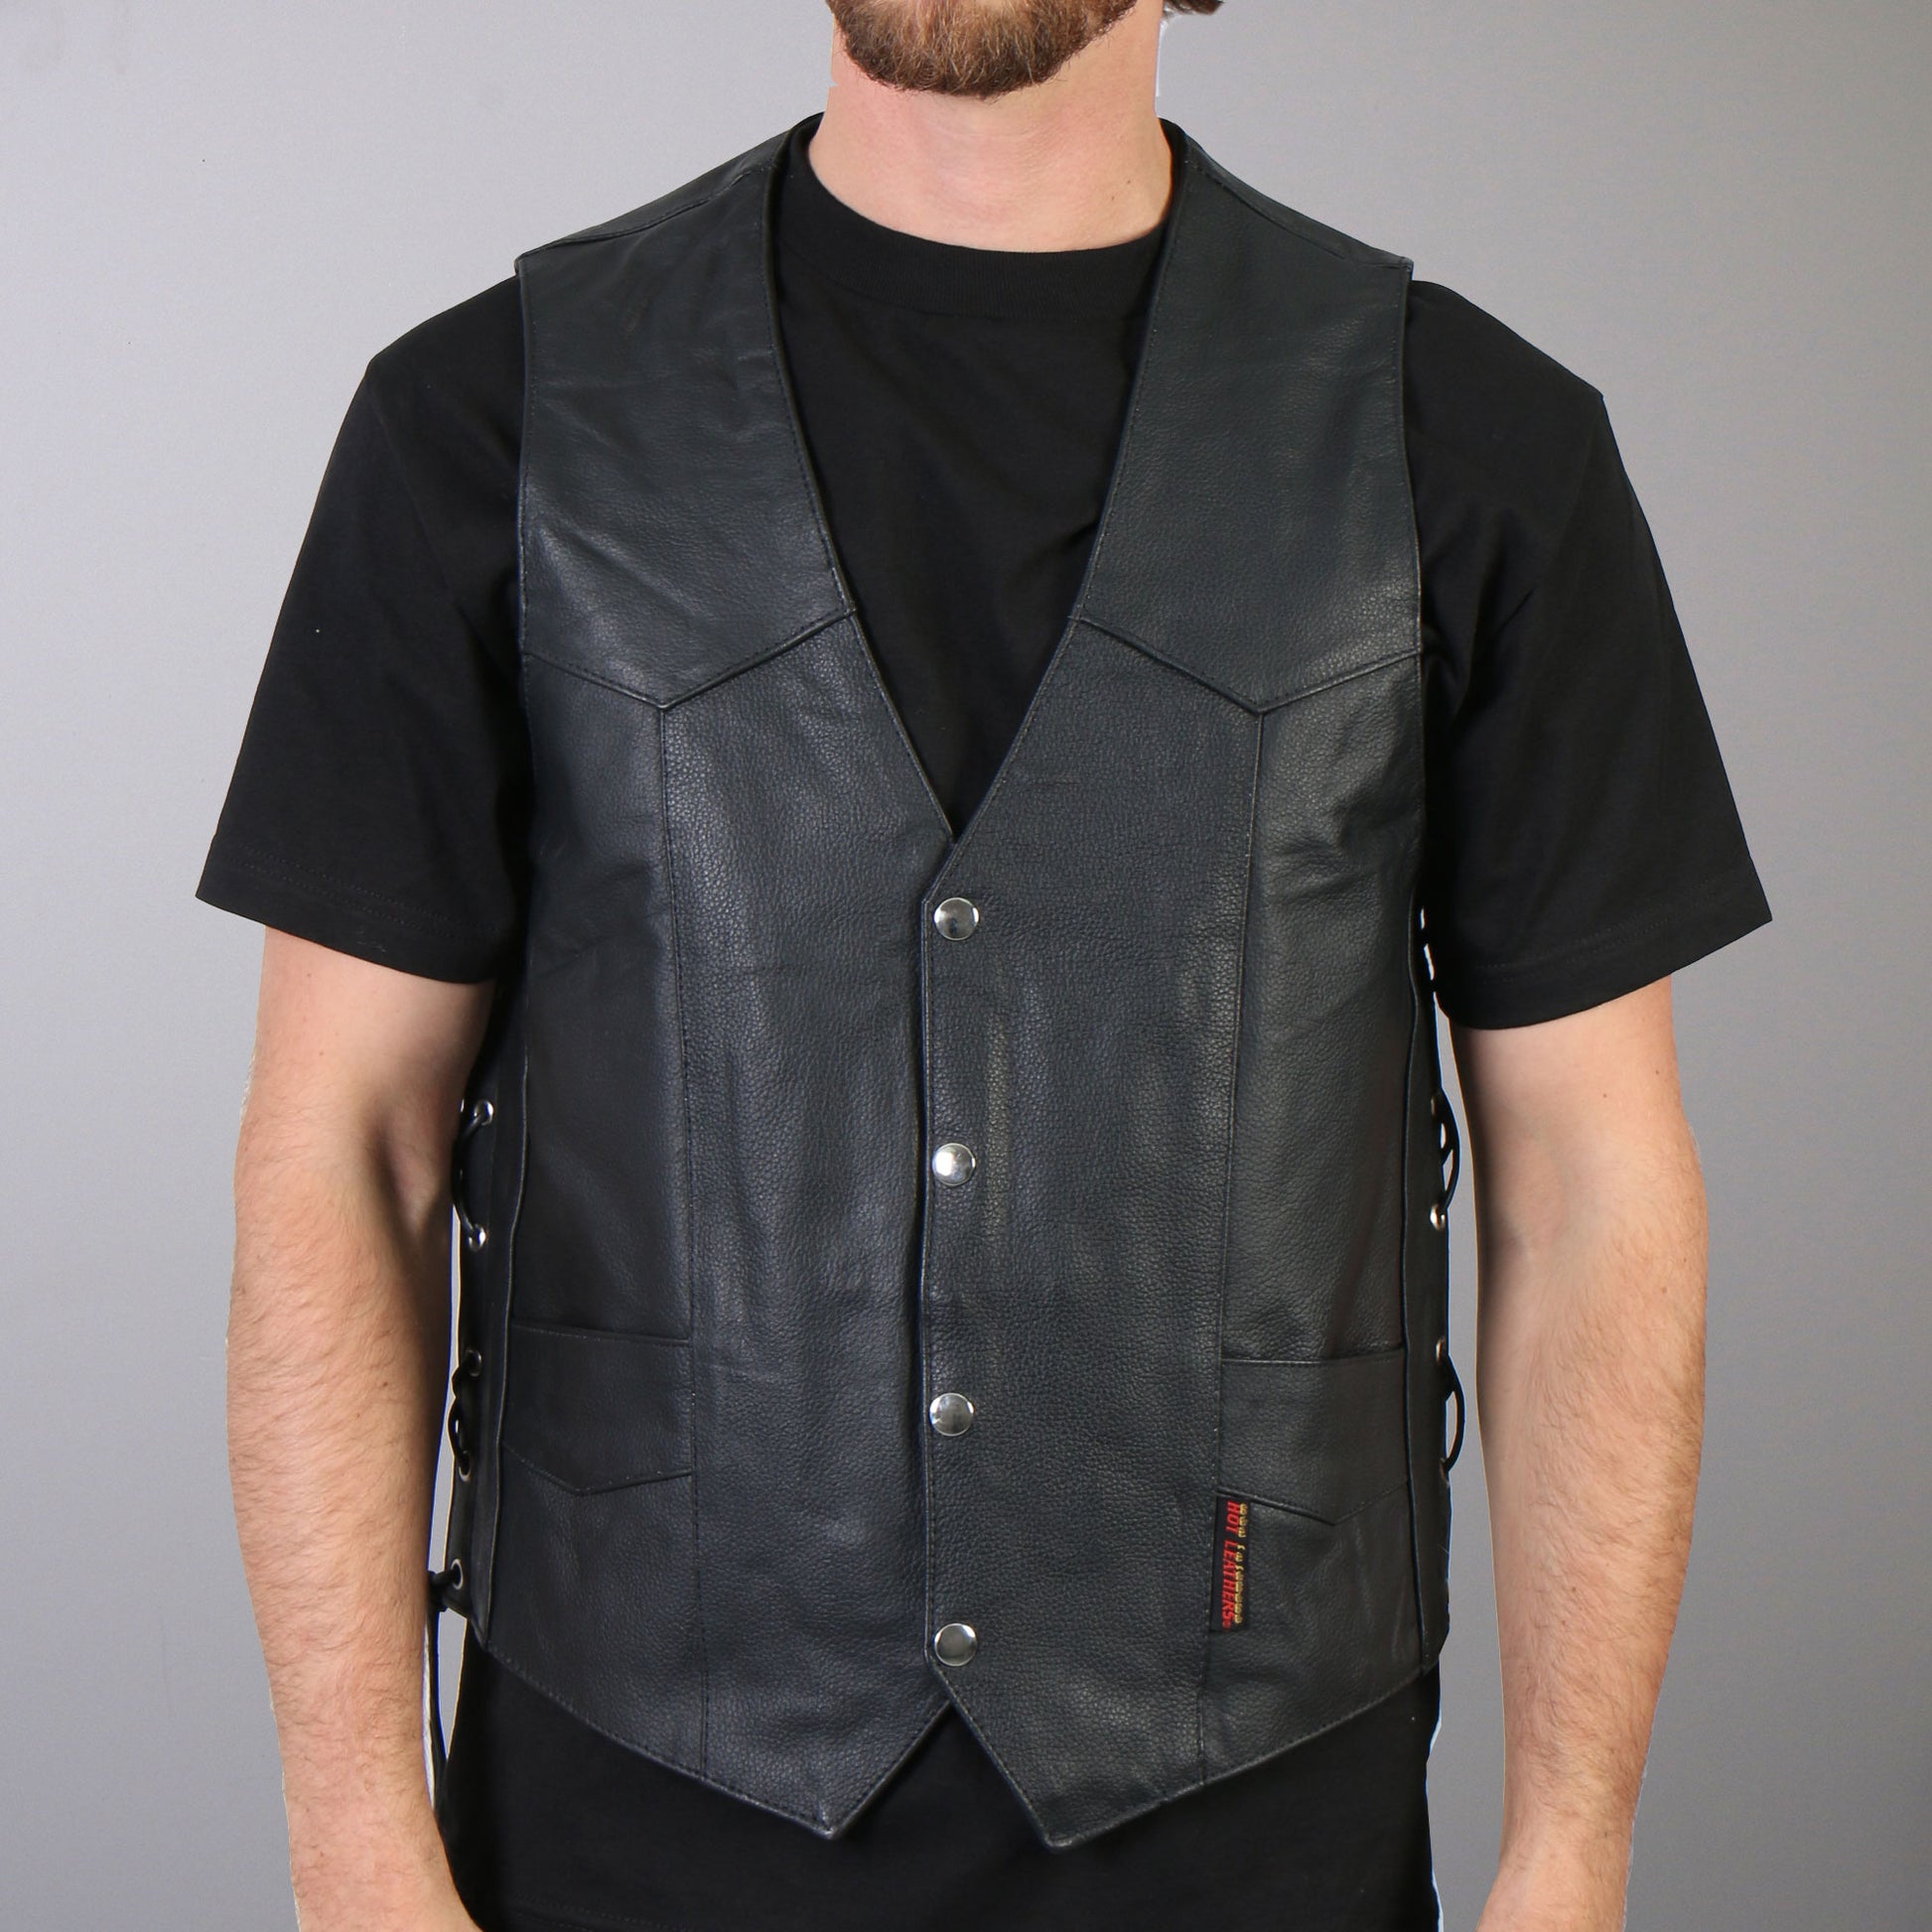 Hot Leathers VSM1022 Men's Black 'Conceal and Carry' Leather Vest